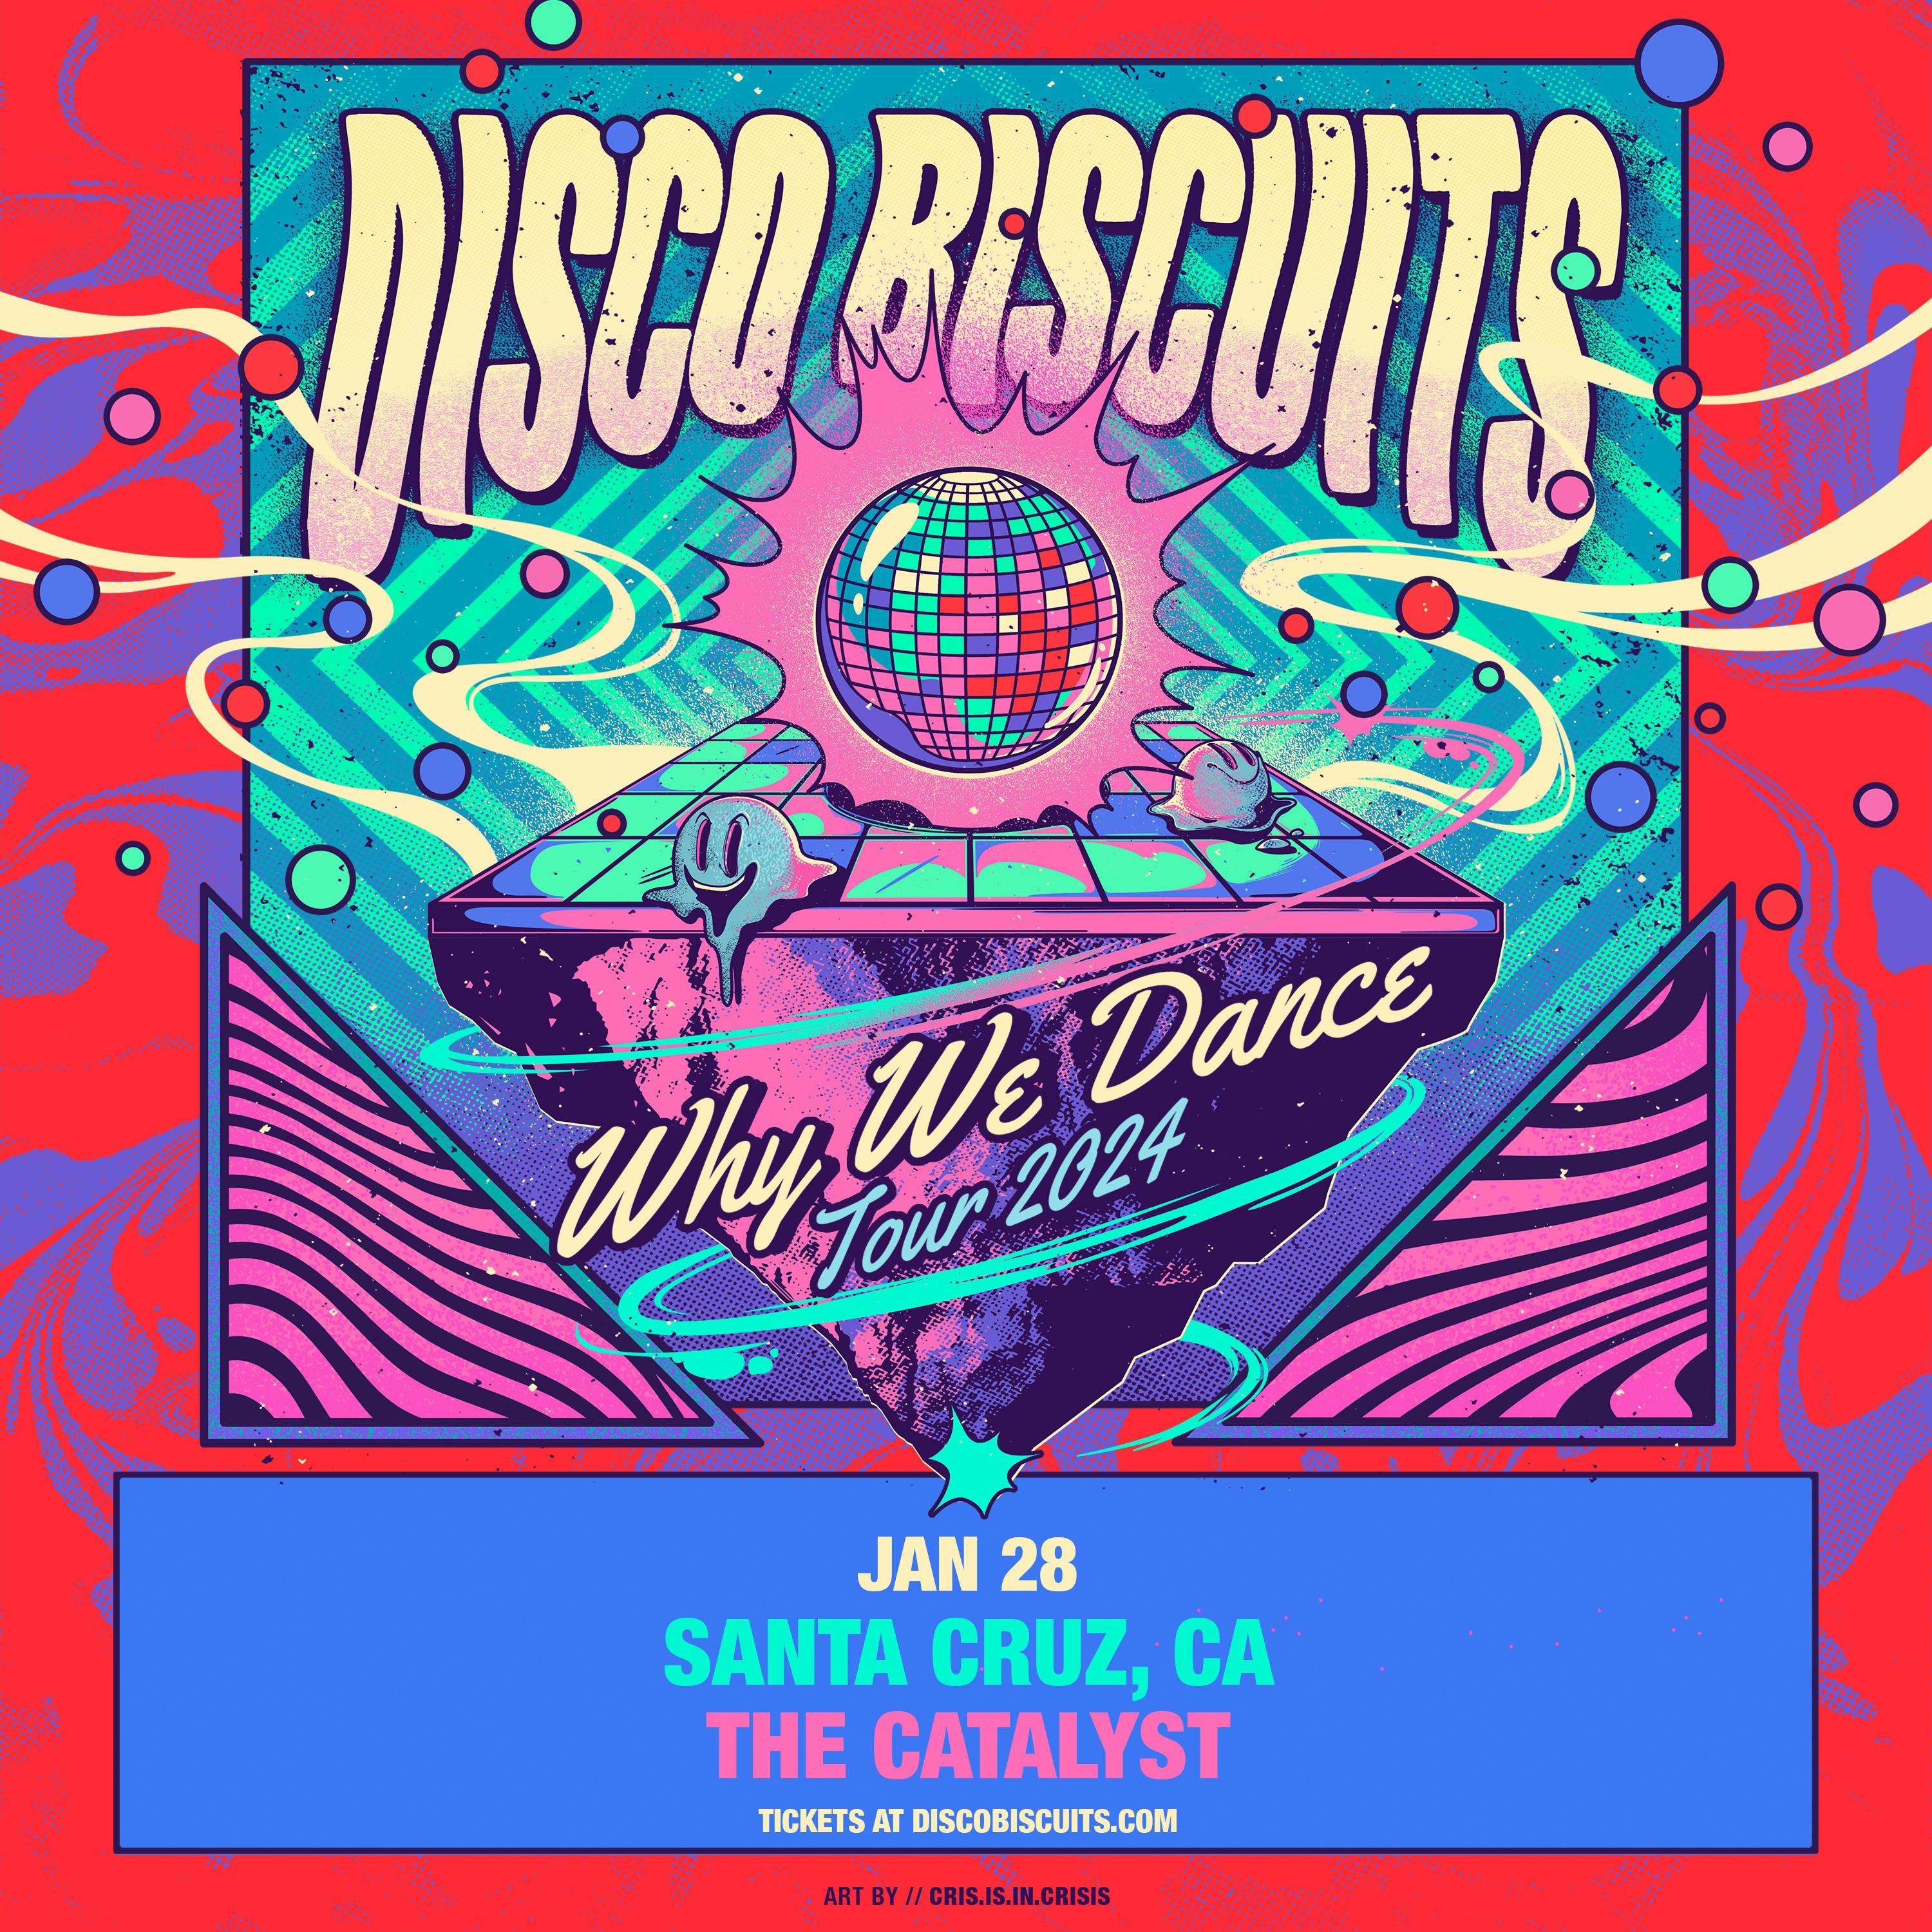 The Disco Biscuits Why We Dance Tour 2024 at The Catalyst Sunday